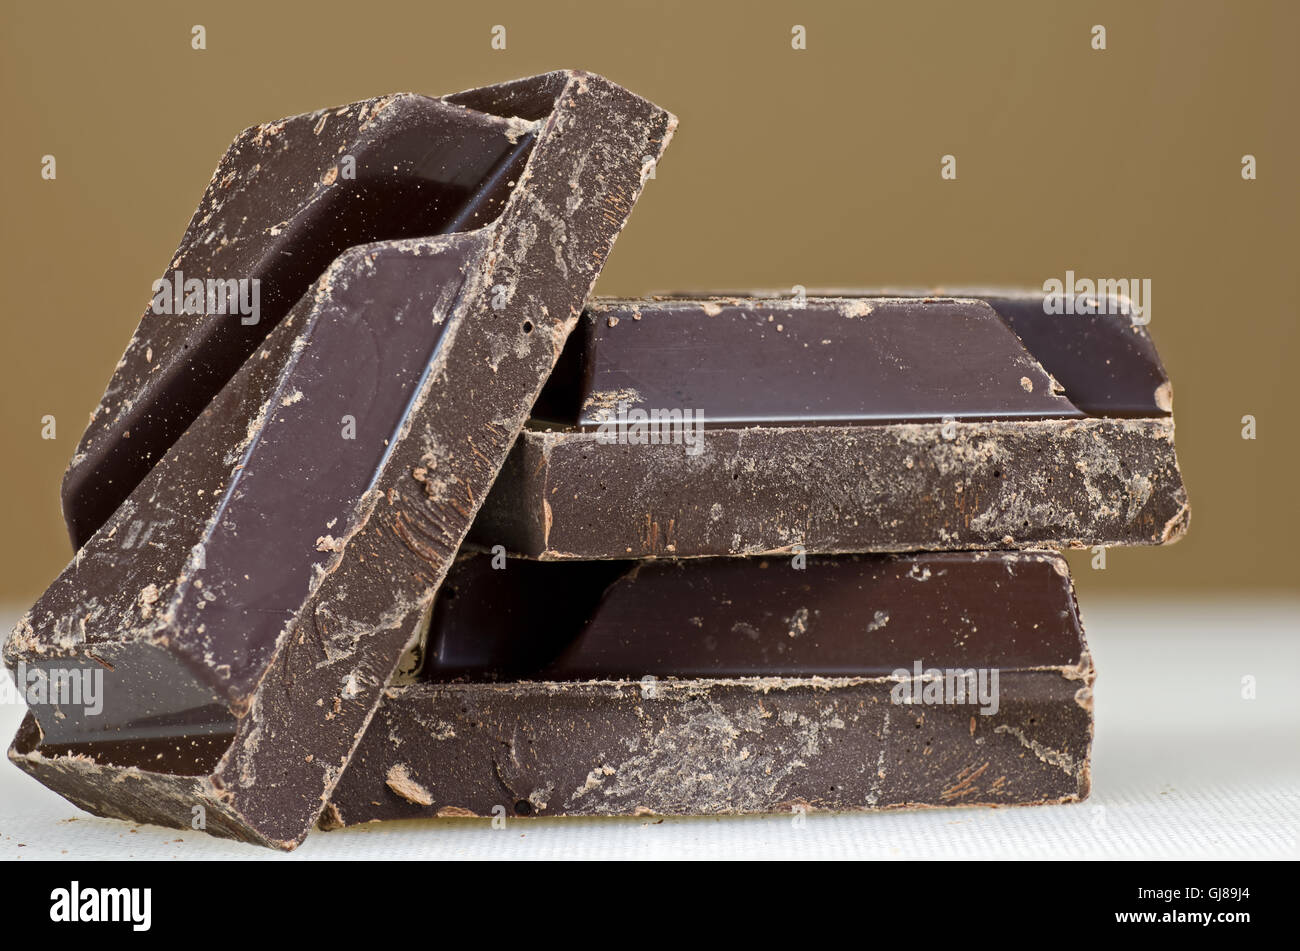 Rich healthy dark chocolate to be eaten fresh or used in baking. Stock Photo